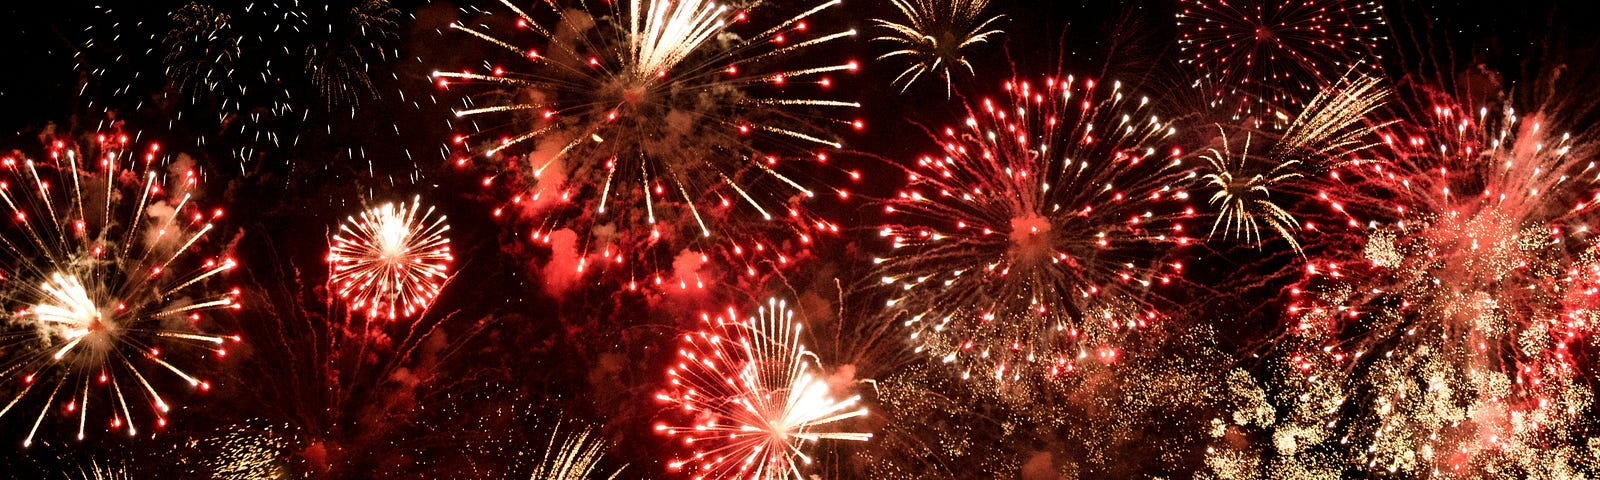 A photo of fireworks that are lighting up the sky in all bright tones.